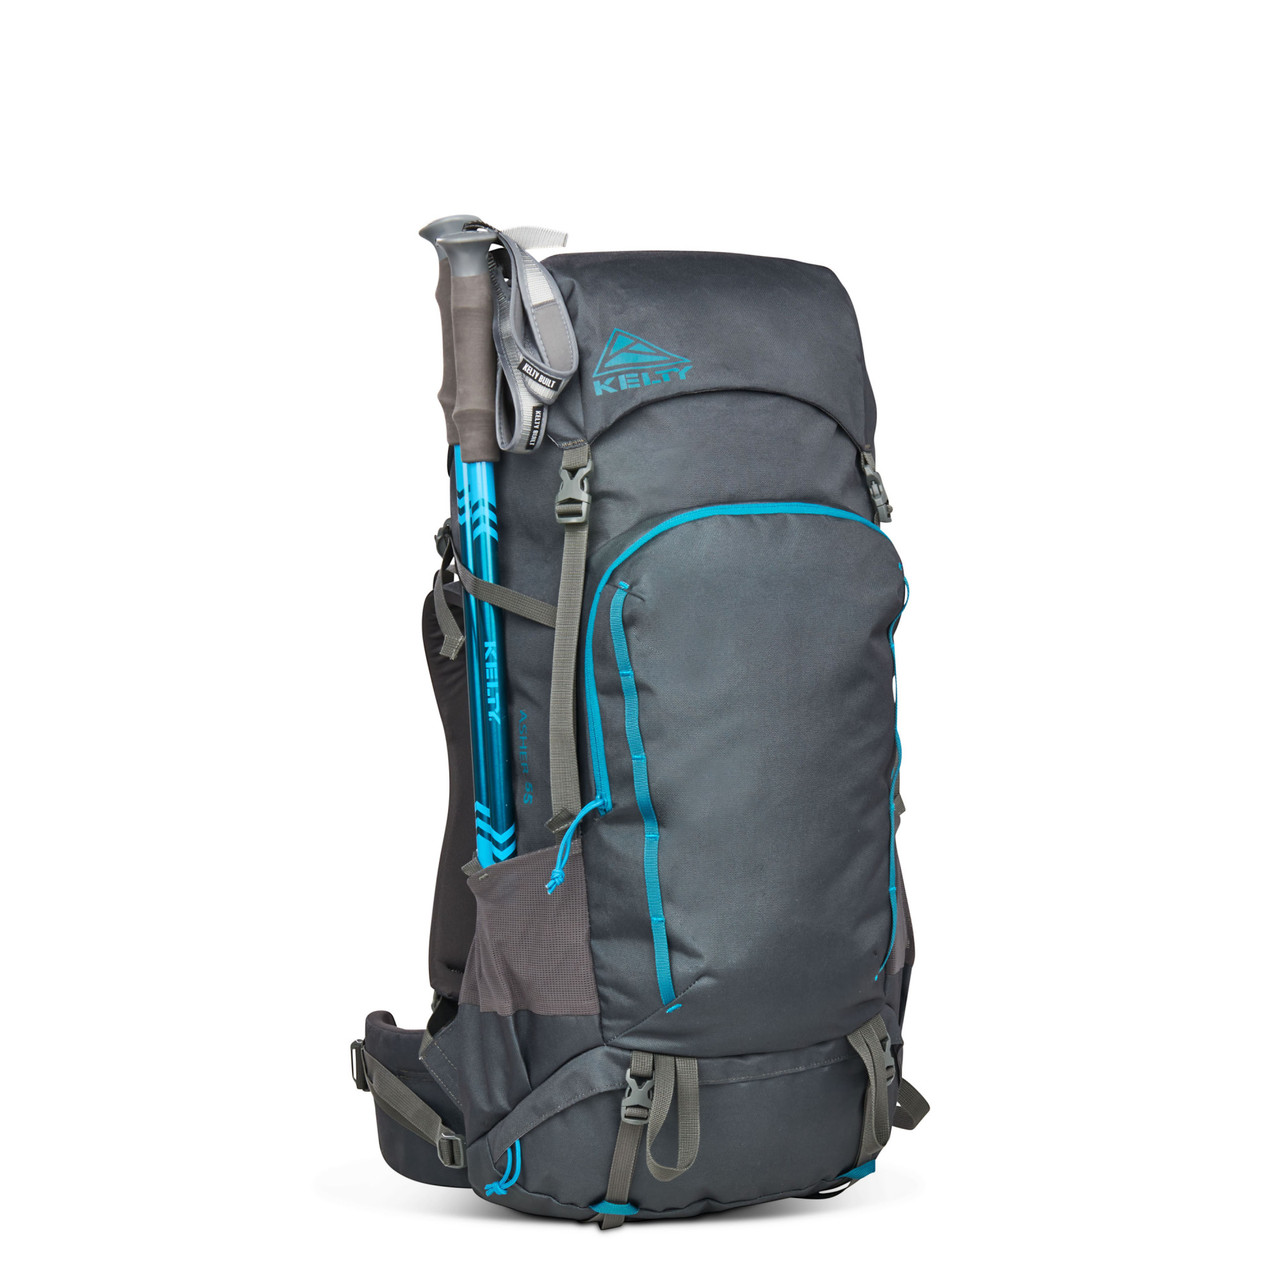 Choosing the Best Hiking Backpack for Women - The Global Curious